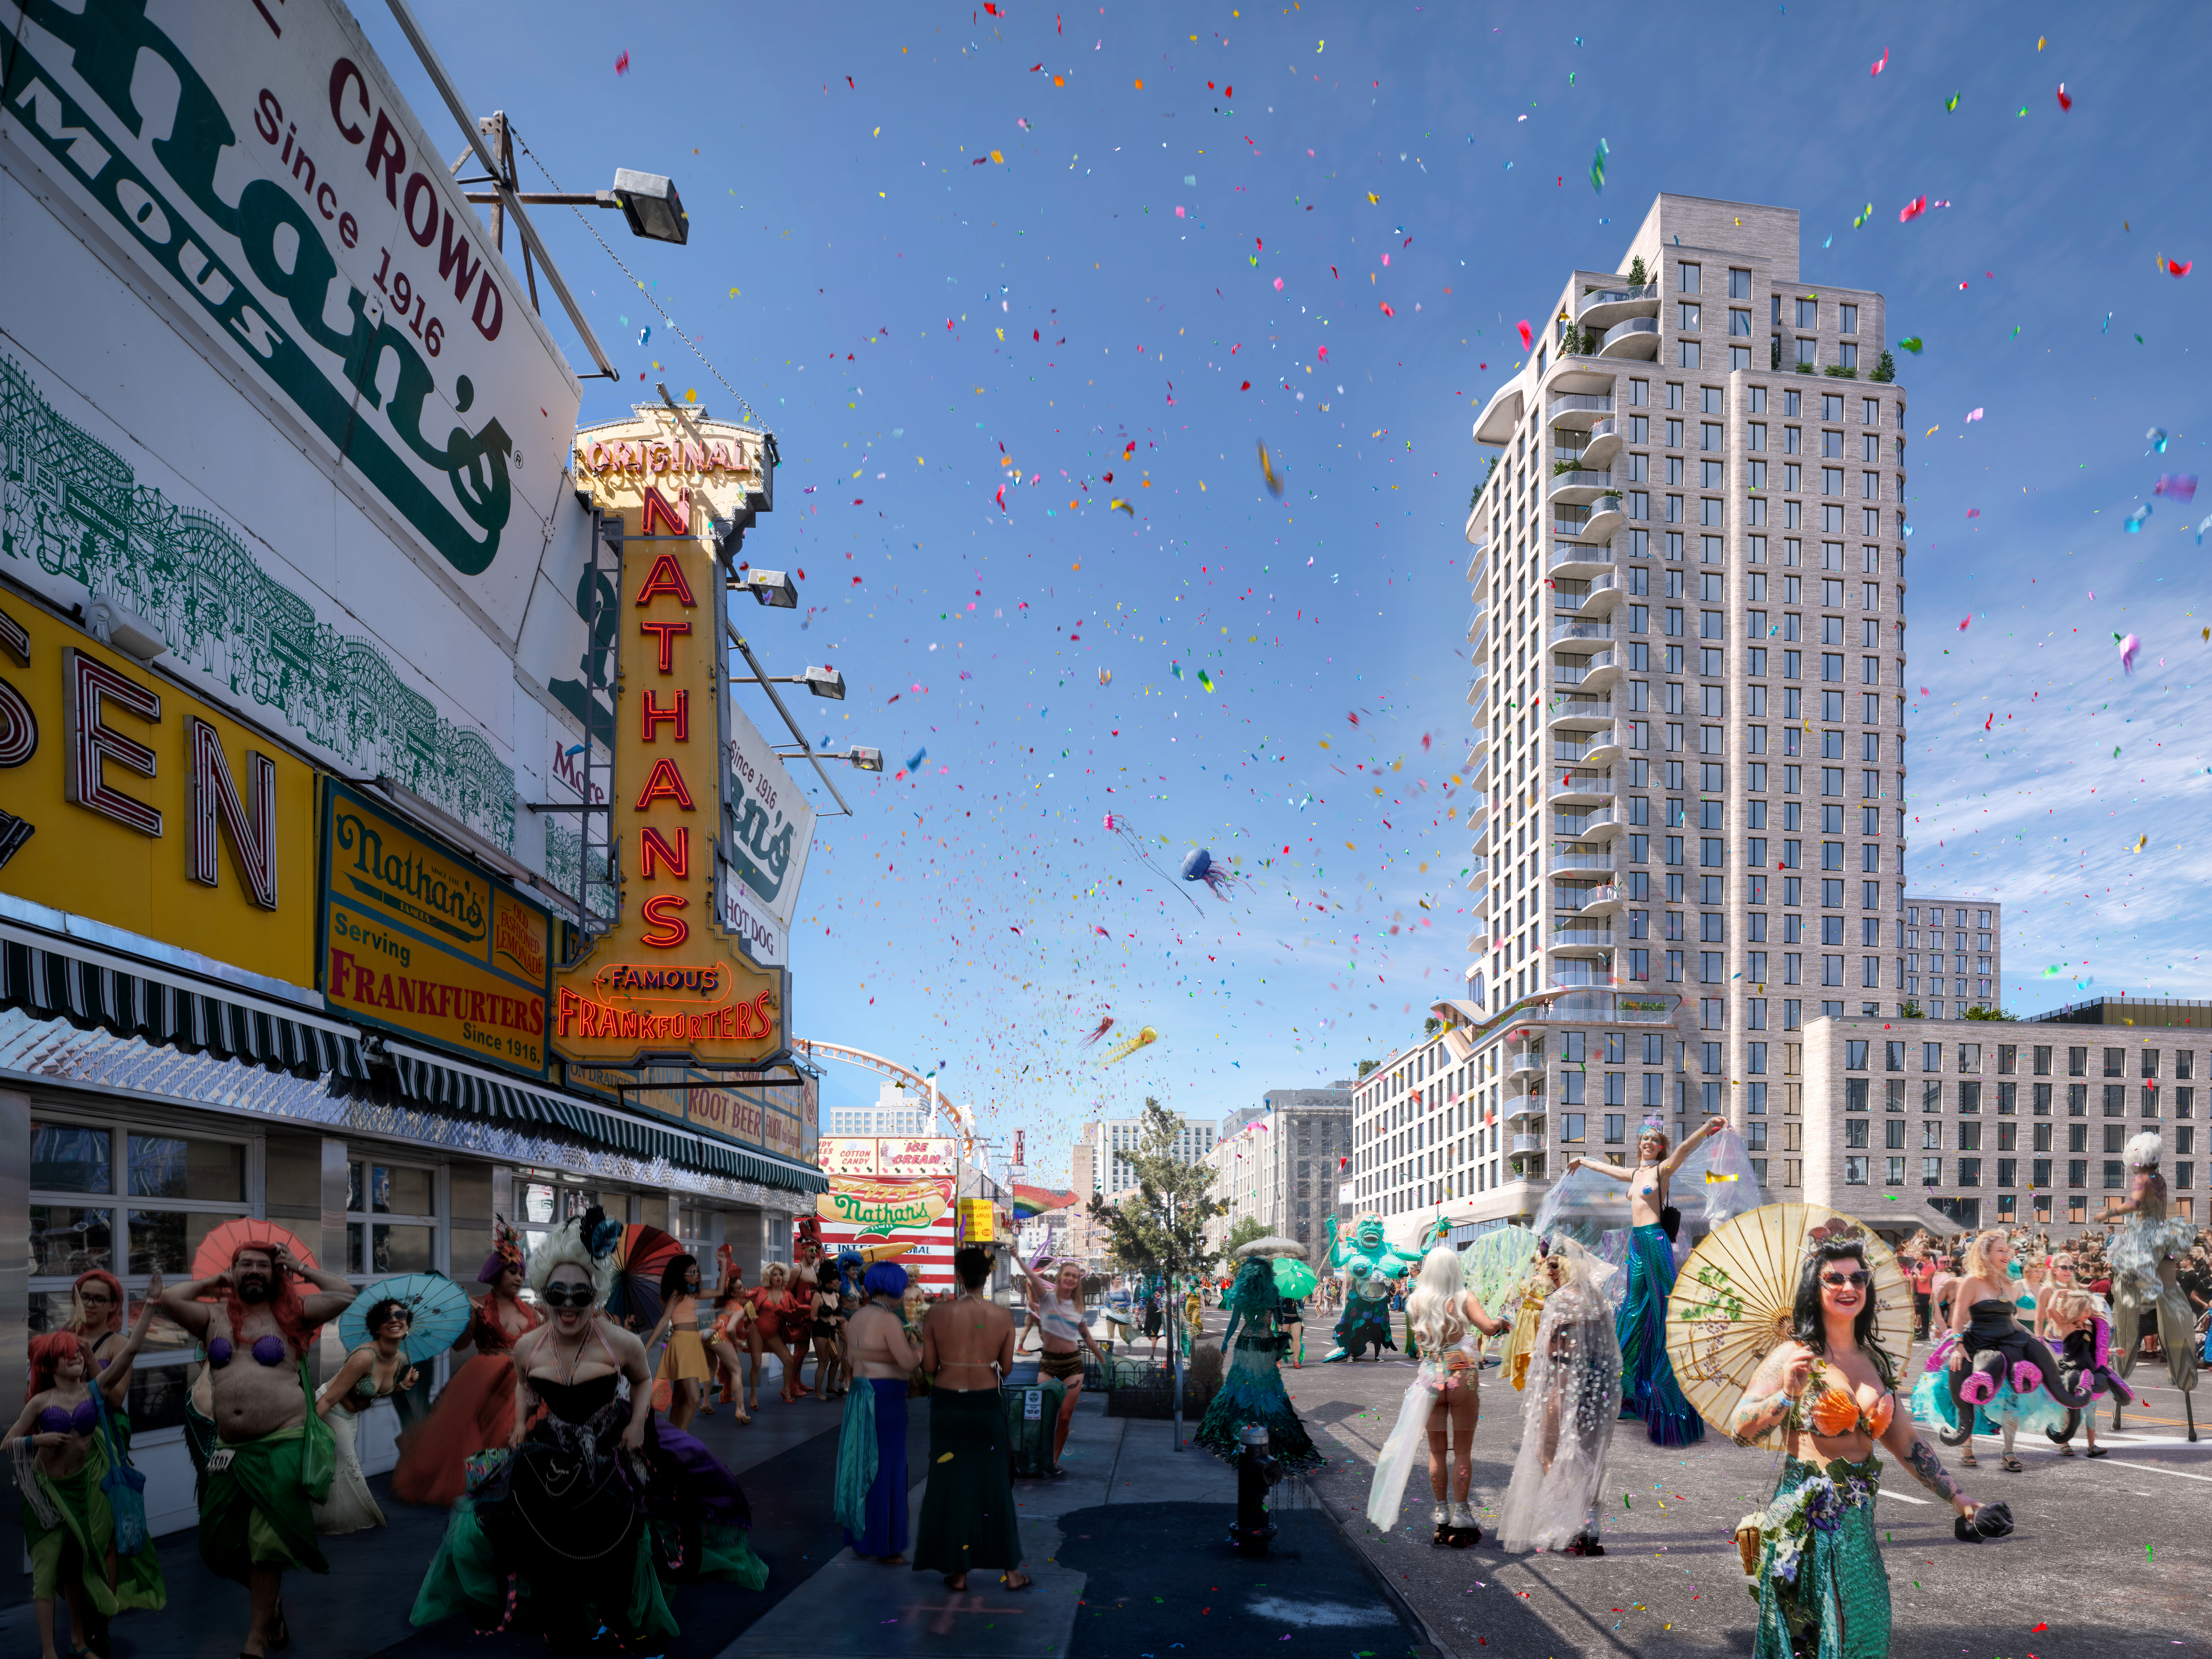 A rendering of a building behind the Mermaid Parade